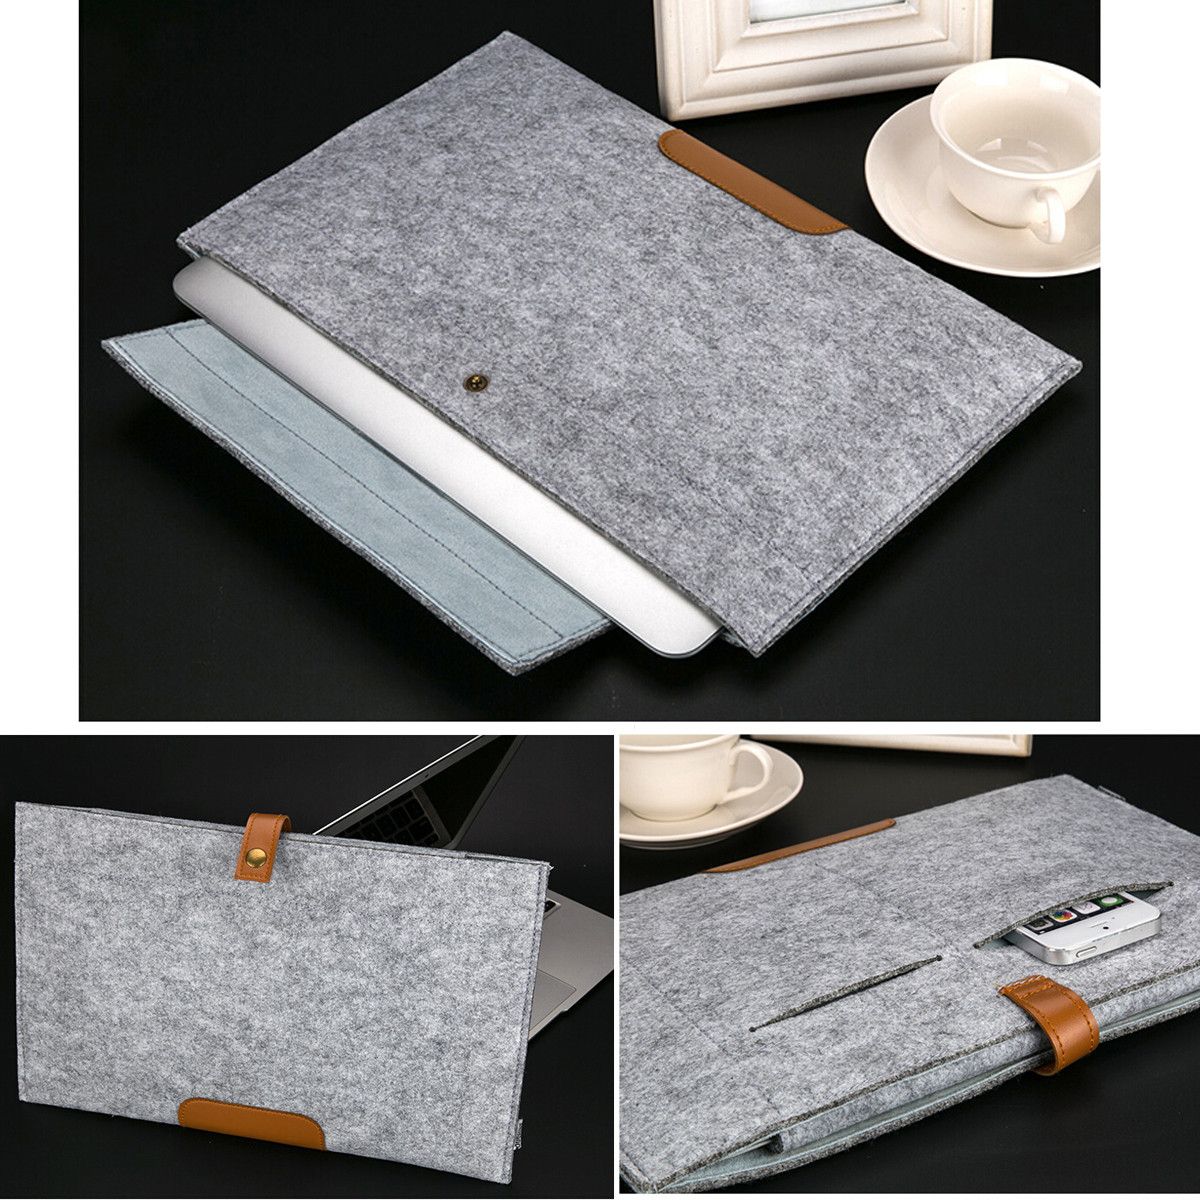 Felt-Laptop-Sleeve-Protective-Cover-Inner-Bag-Computer-Bag-for-11quot-Macbook-Apple-Notebook-1745037